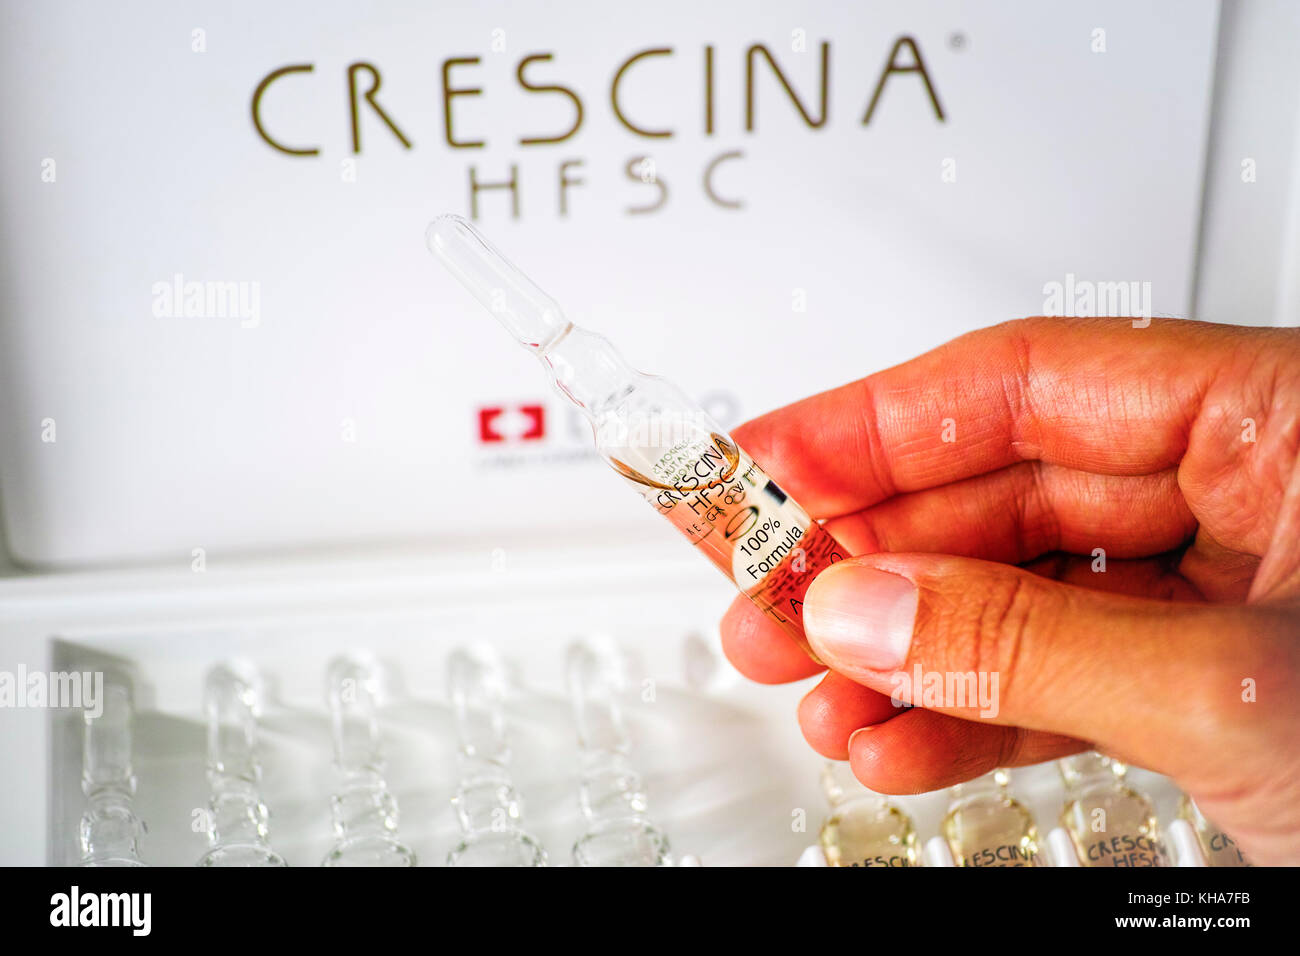 Paphos, Cyprus - November 13, 2015 Woman hand with ampoule of Crescina HFSC  Re-Growth formula in front of Crescina treatment box. Crescina HFSC preser  Stock Photo - Alamy